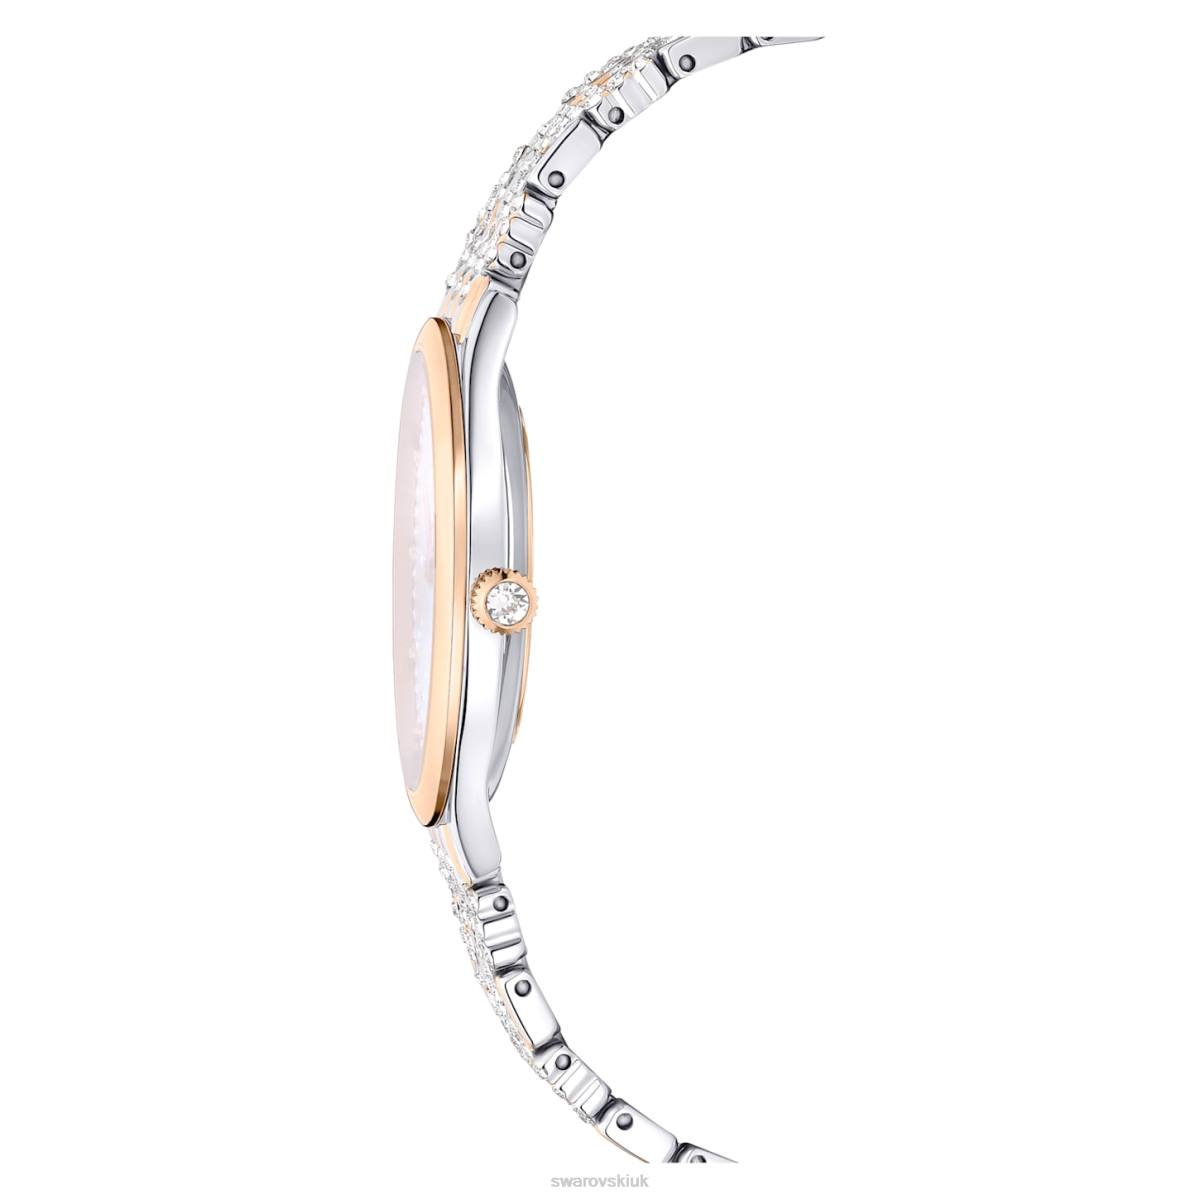 Accessories Swarovski Attract watch Swiss Made, Pave, Metal bracelet, Rose gold tone, Mixed metal finish 48JX1182